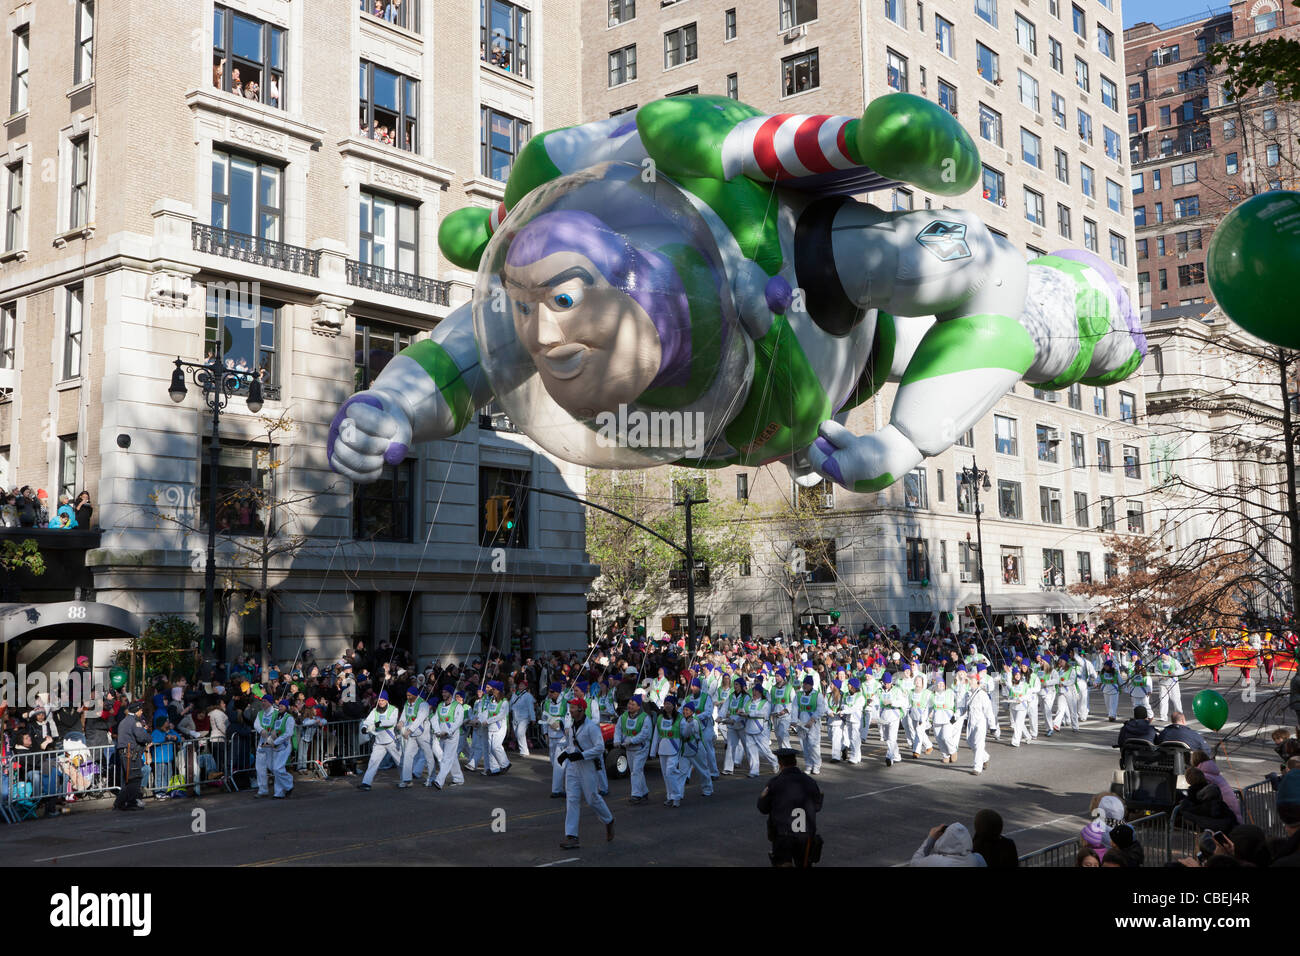 The Buzz Lightyear helium filled balloon floats overhead during the 2011 Macy's Thanksgiving Day Parade in New York City. Stock Photo